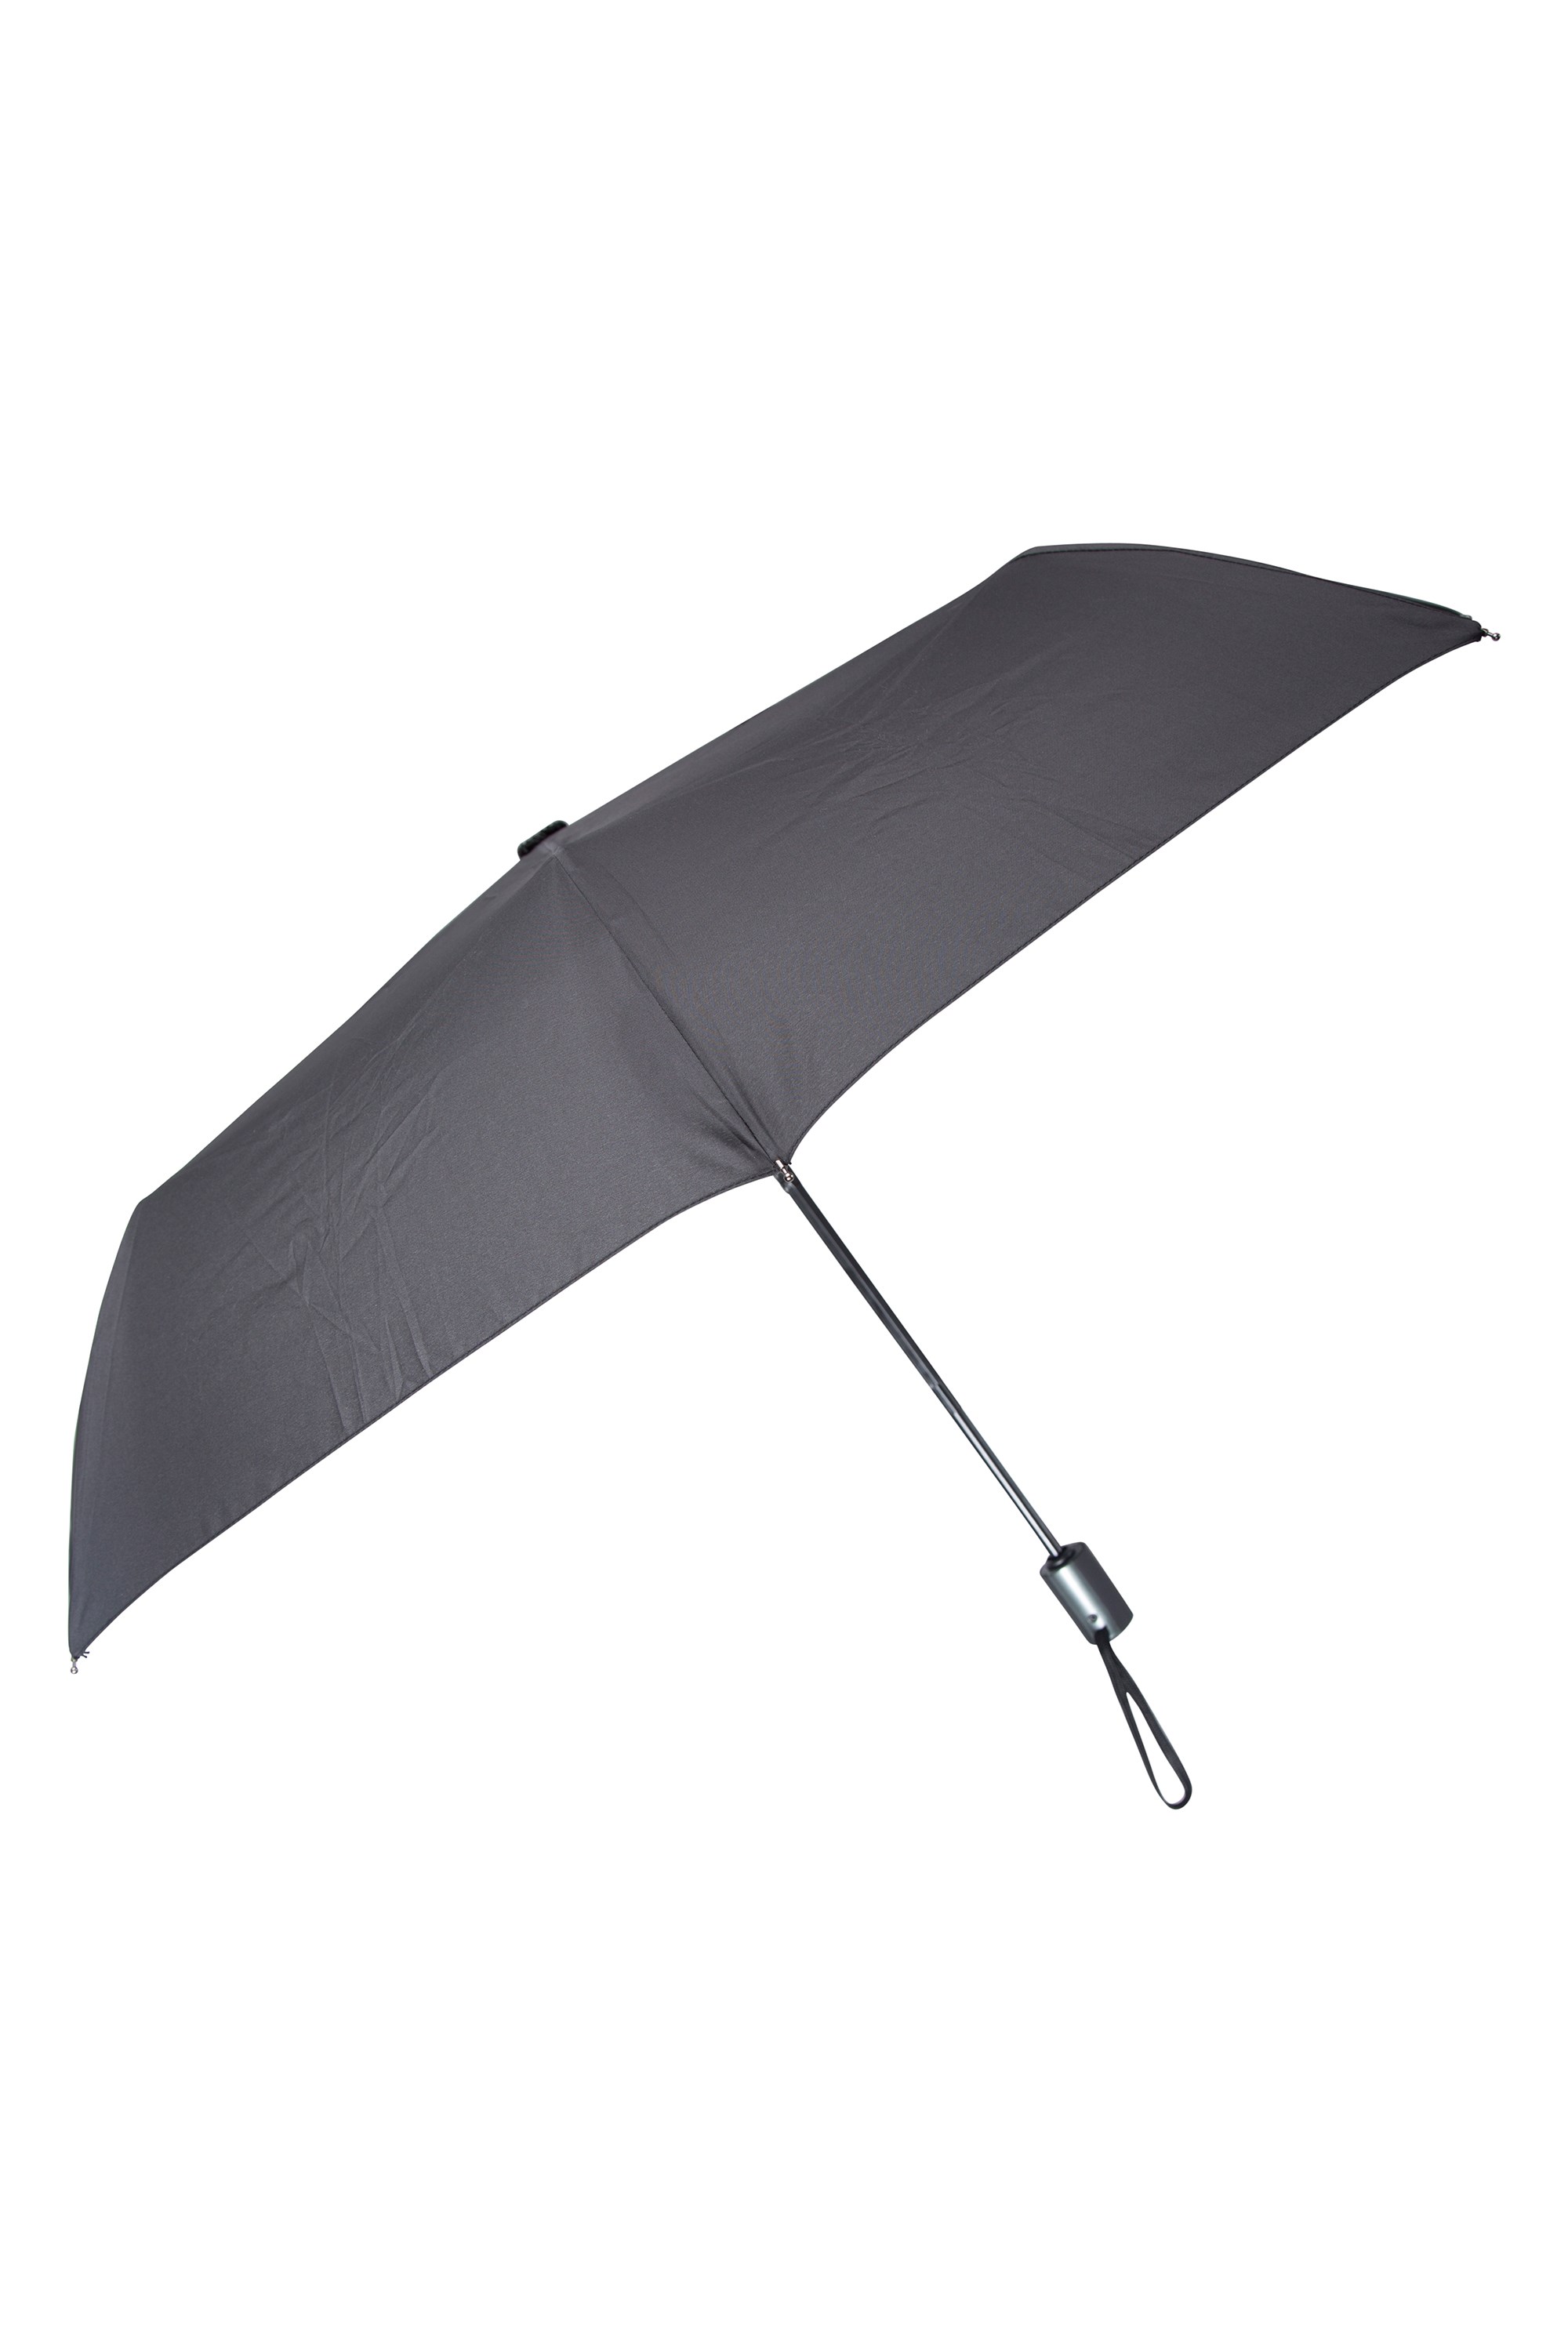 Ideal For Travel Portable Unisex Brolly Durable Womens Accessories Umbrellas Golf & Walking Red Mountain Warehouse Dome Umbrella Sun & Wind Protection 